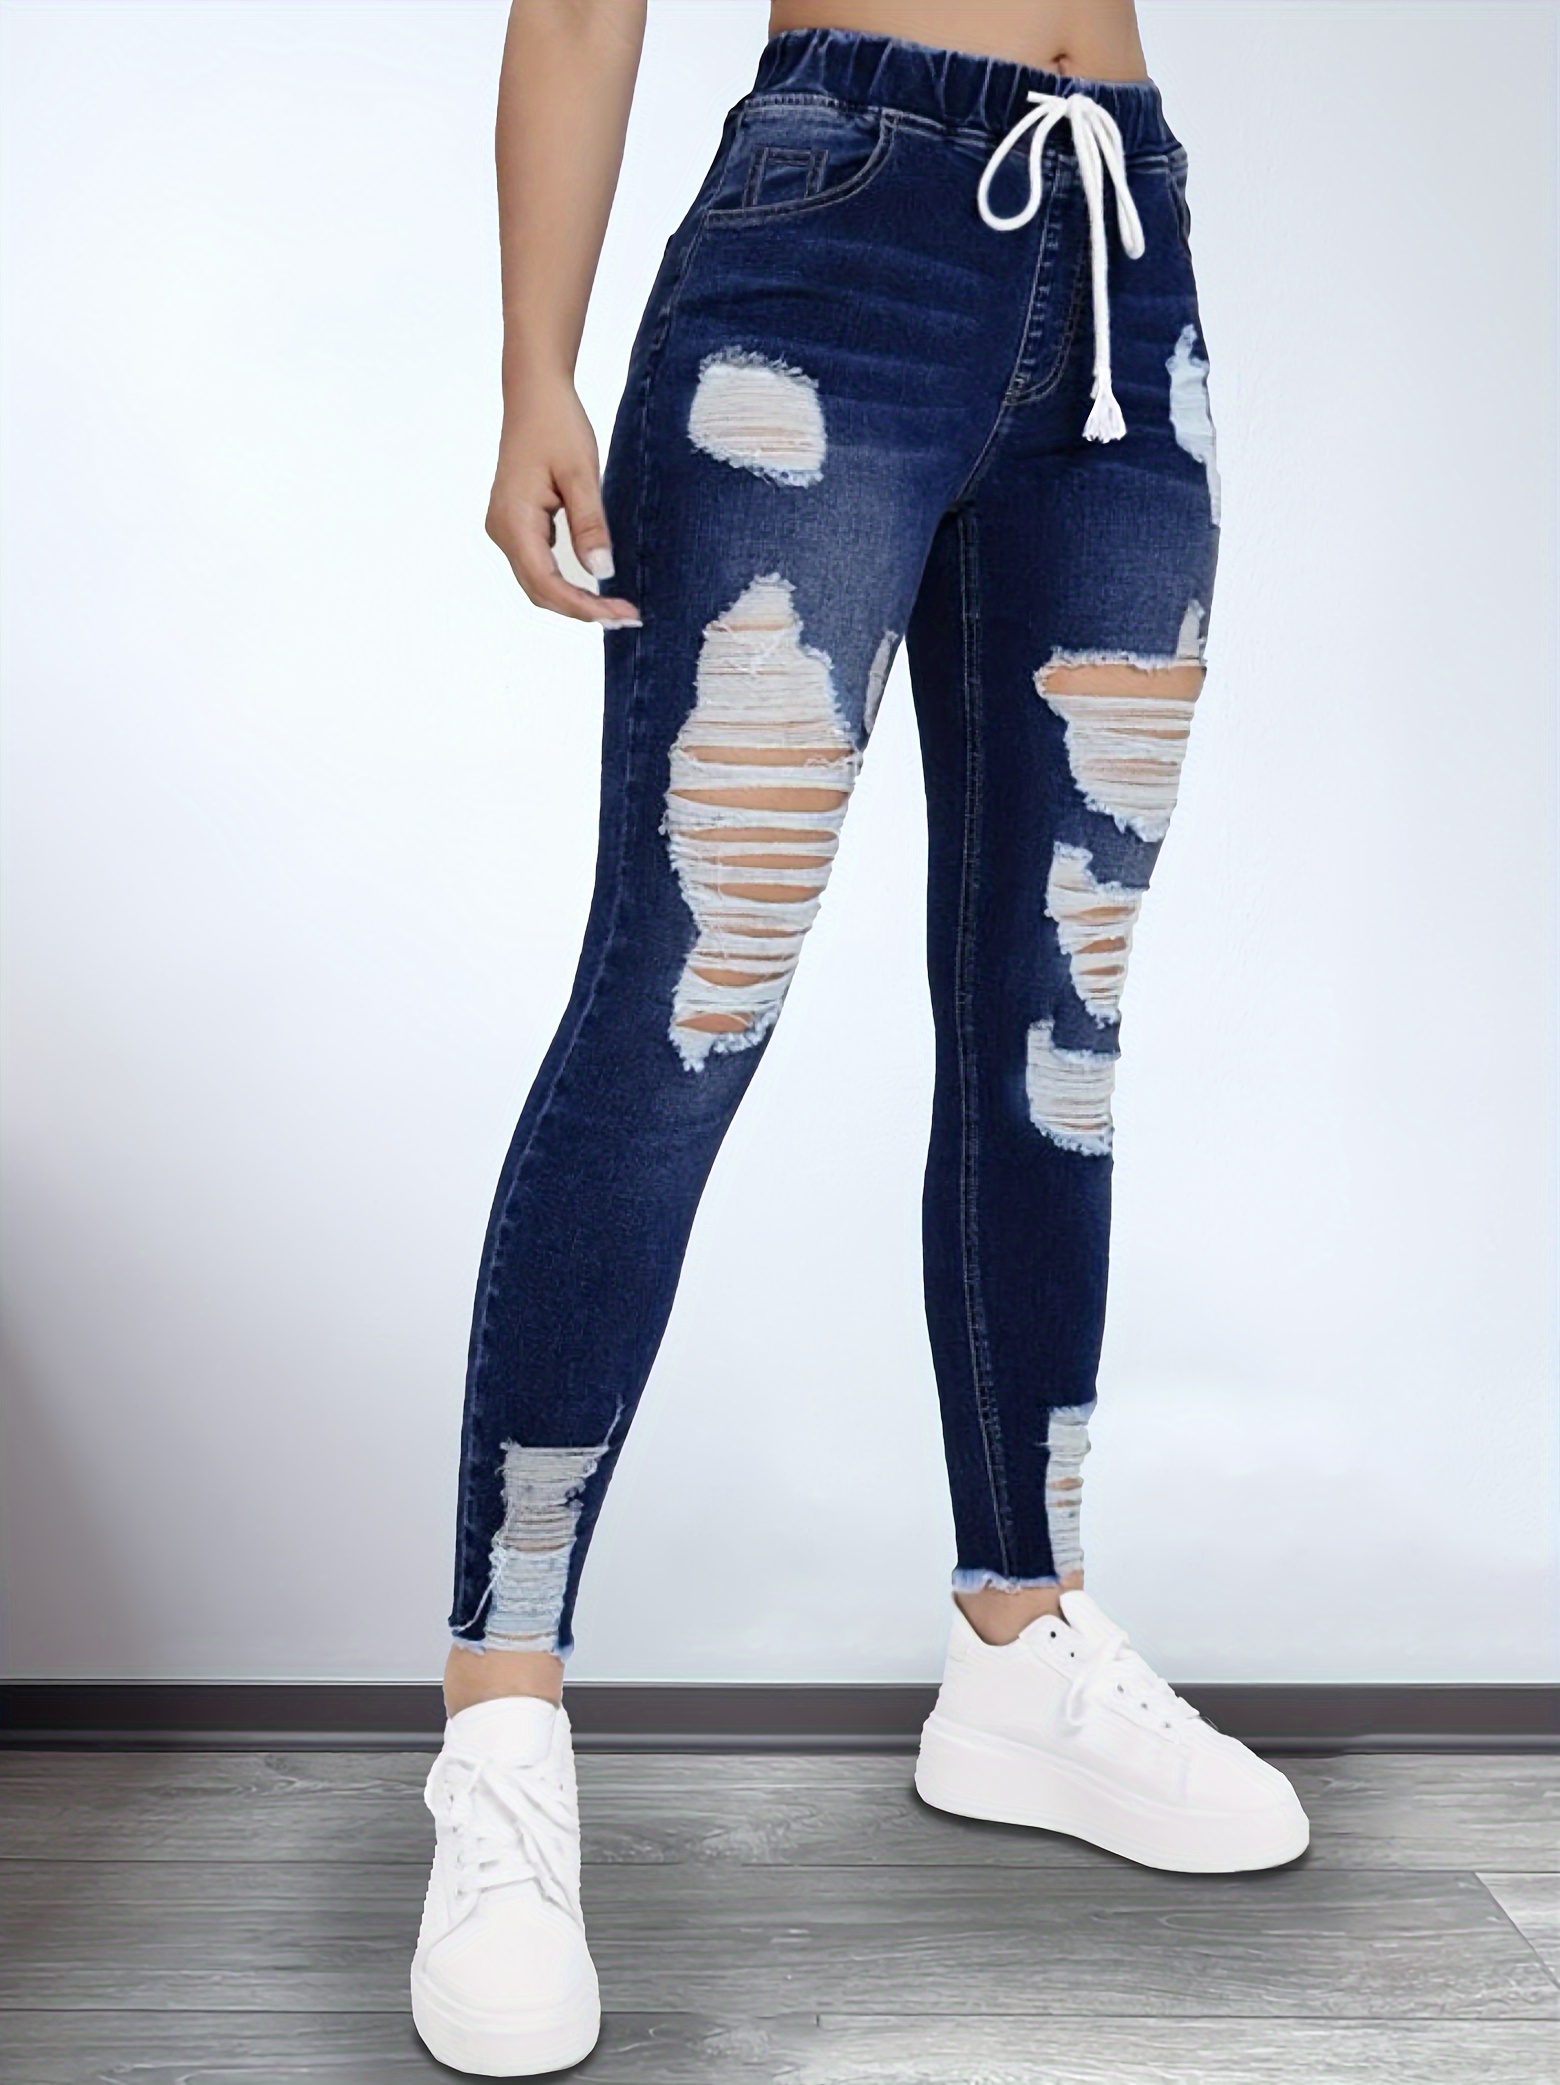 Skinny Pencil Pants Woman High Waist Ripped Jeans For Women Denim